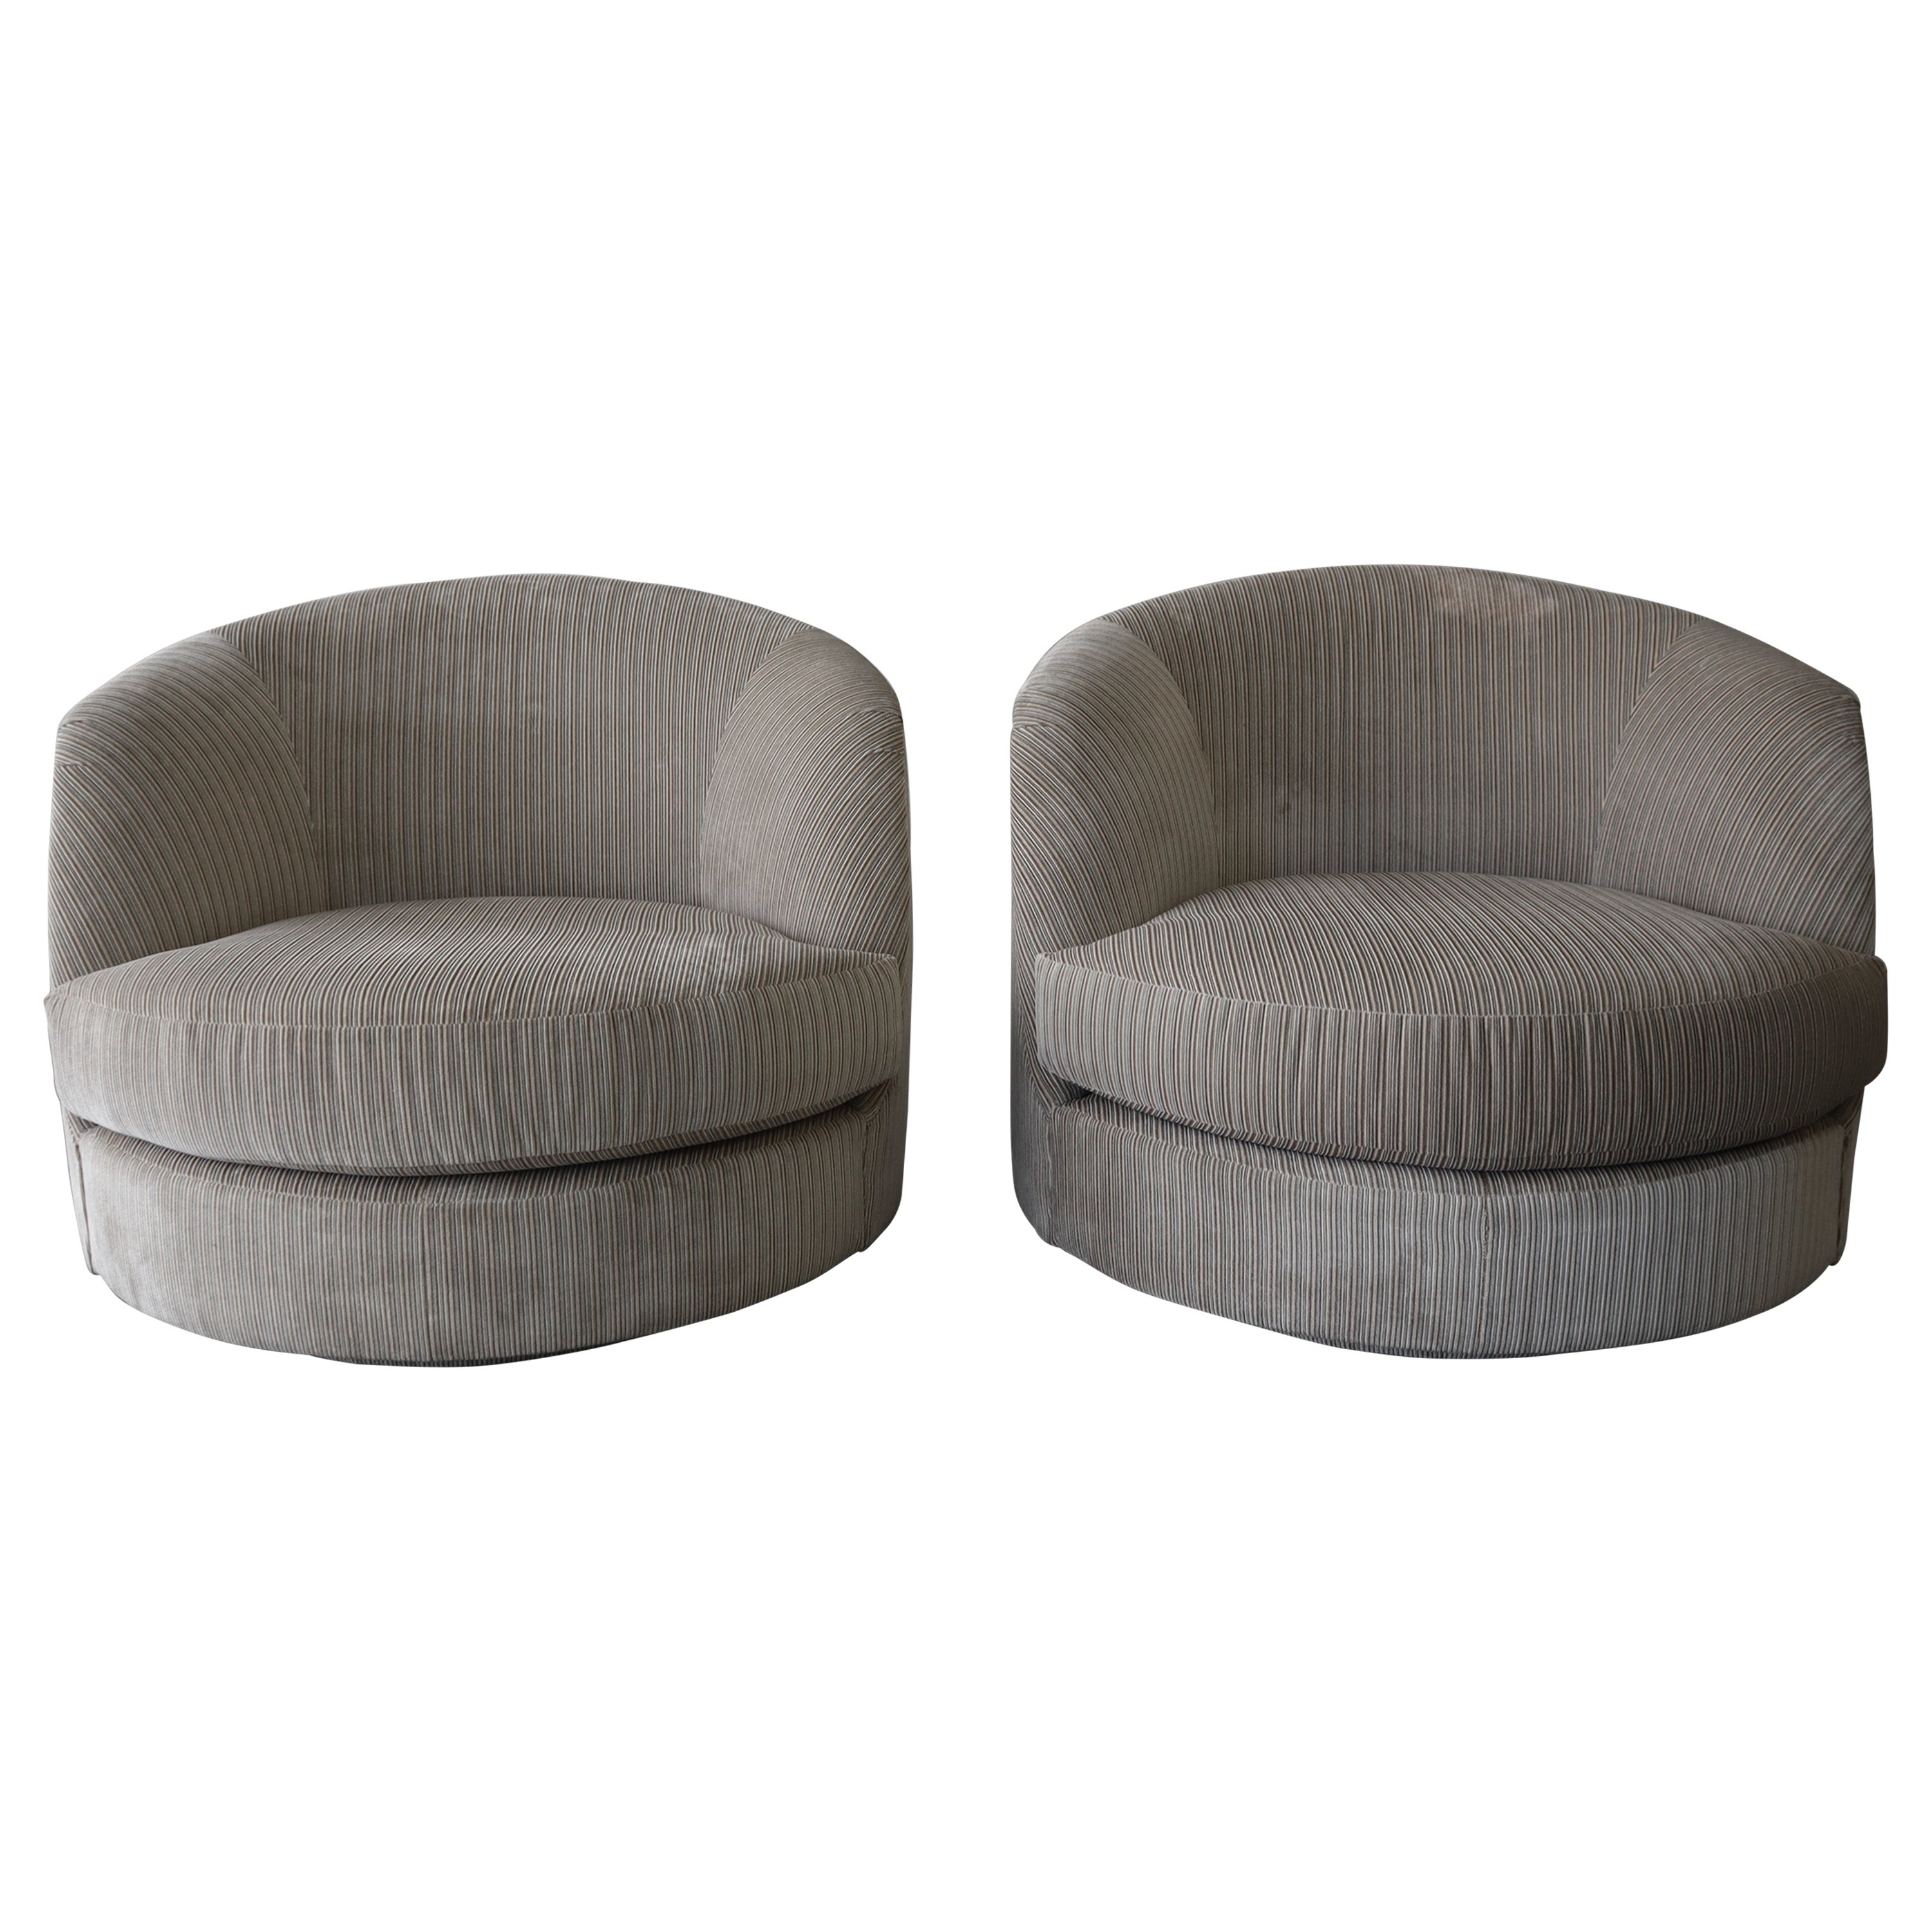 Oversized Pair of Barrel Swivel Chairs